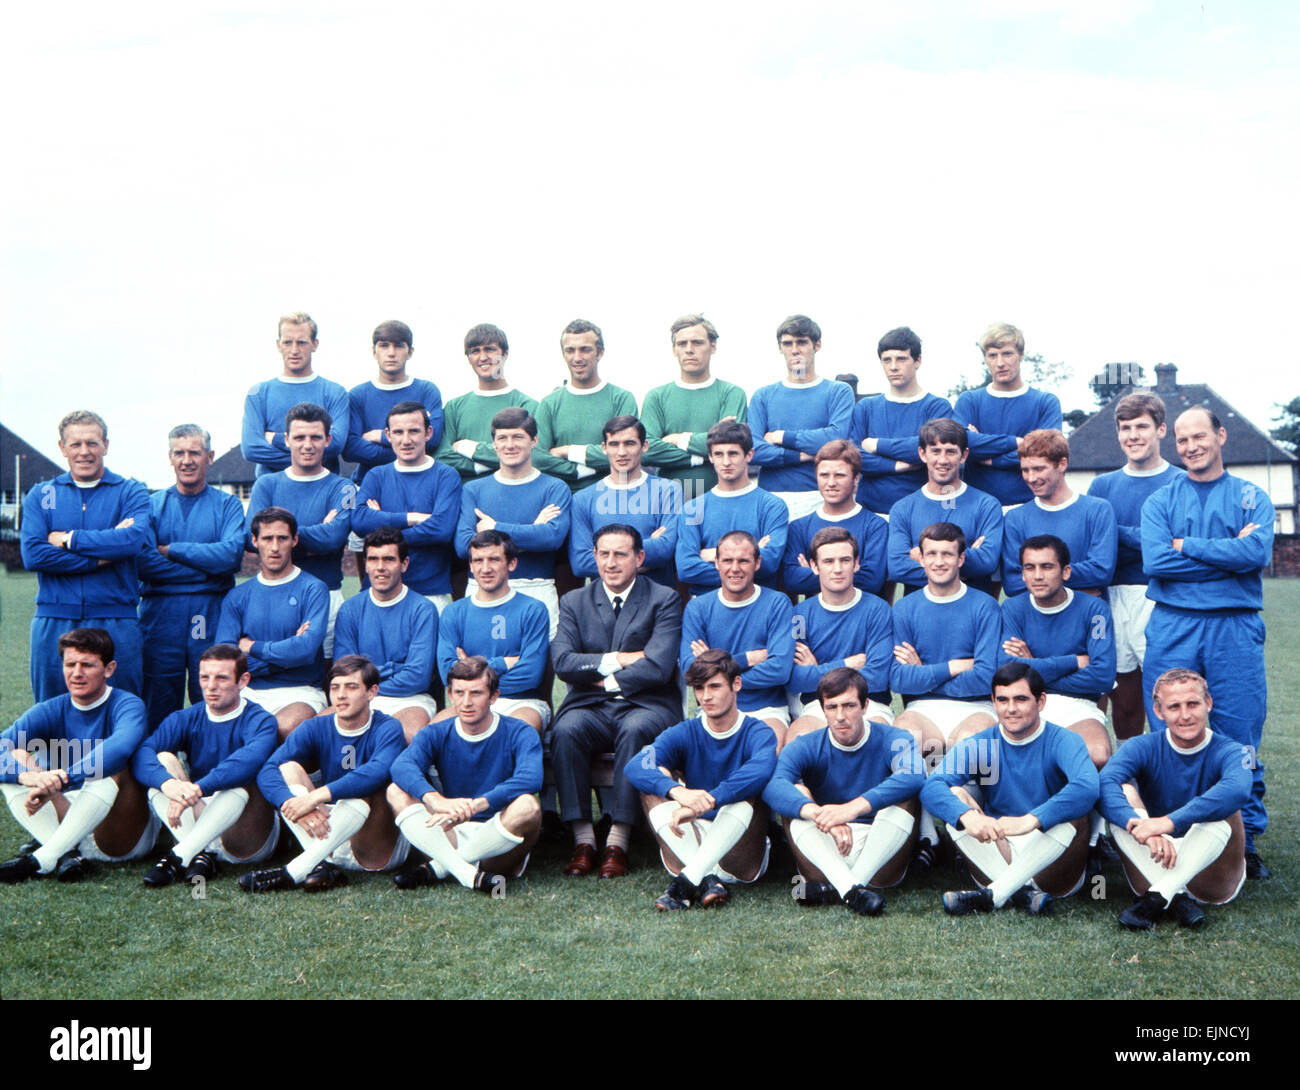 Everton squad pose for a group photograph. Back row left to right: Sandy Brown, Harry Bennett, Andy Rankin, Geoff Barnett, Gordon West, Roger Kenyon, Frank Thornton and Terry Owen. Third Row: T Eggleston, T Watson (trainer), Fred Pickering, Frank Darcy, Derek Smith, John Hurst, Jimmy Husband, Bill Brindle, Howard Kendall, Alan Ball, Joe Royle and A Proudler (trainer). Second row: Derek Temple, Alex Scott, John Morrisey, manager Harry Catterick, Ray Wilson, Colin Harvey, Tommy Wright and Mike Trebilcock. Front row: Brian Labone, Aiden Maher, David Turner, Alex Wallace, Arthur Styles, Gerard Gl Stock Photo